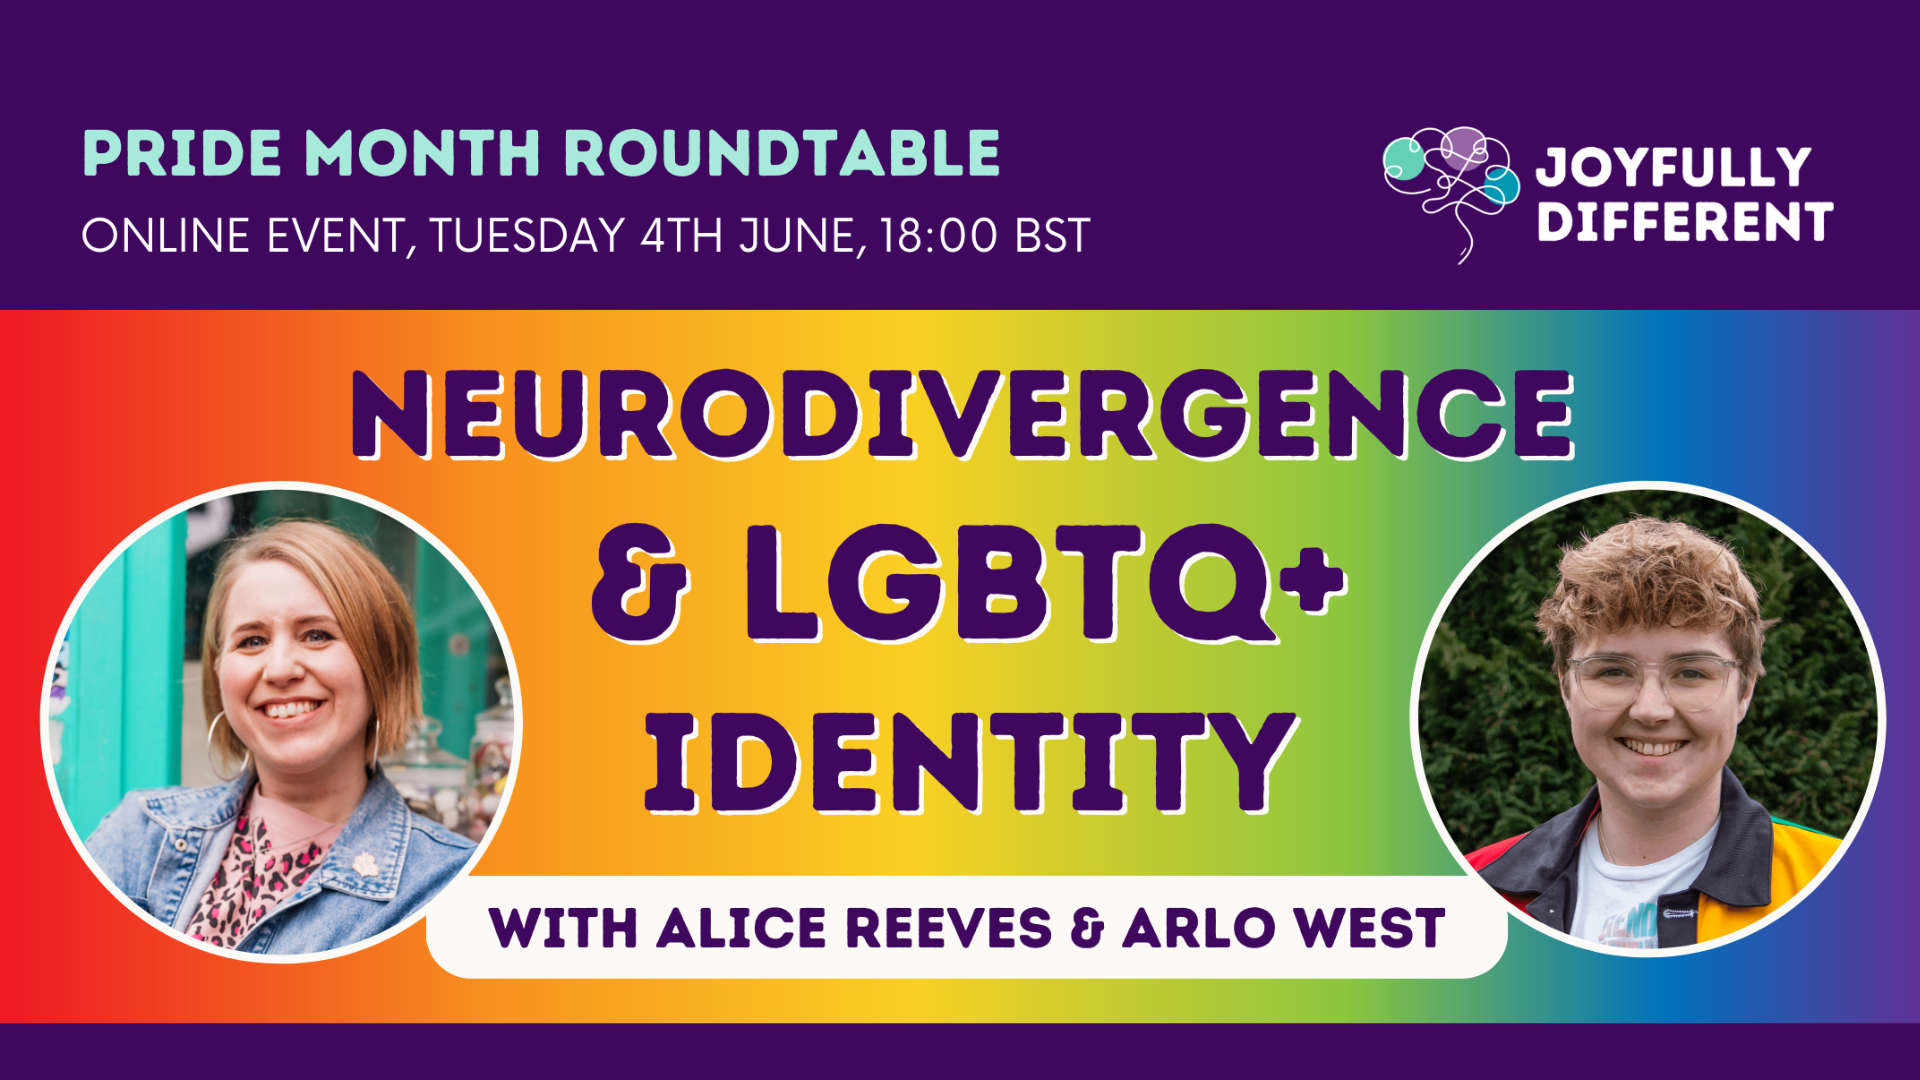 Pride Month: Neurodivergence & LGBTQ+ Identity Online Roundtable